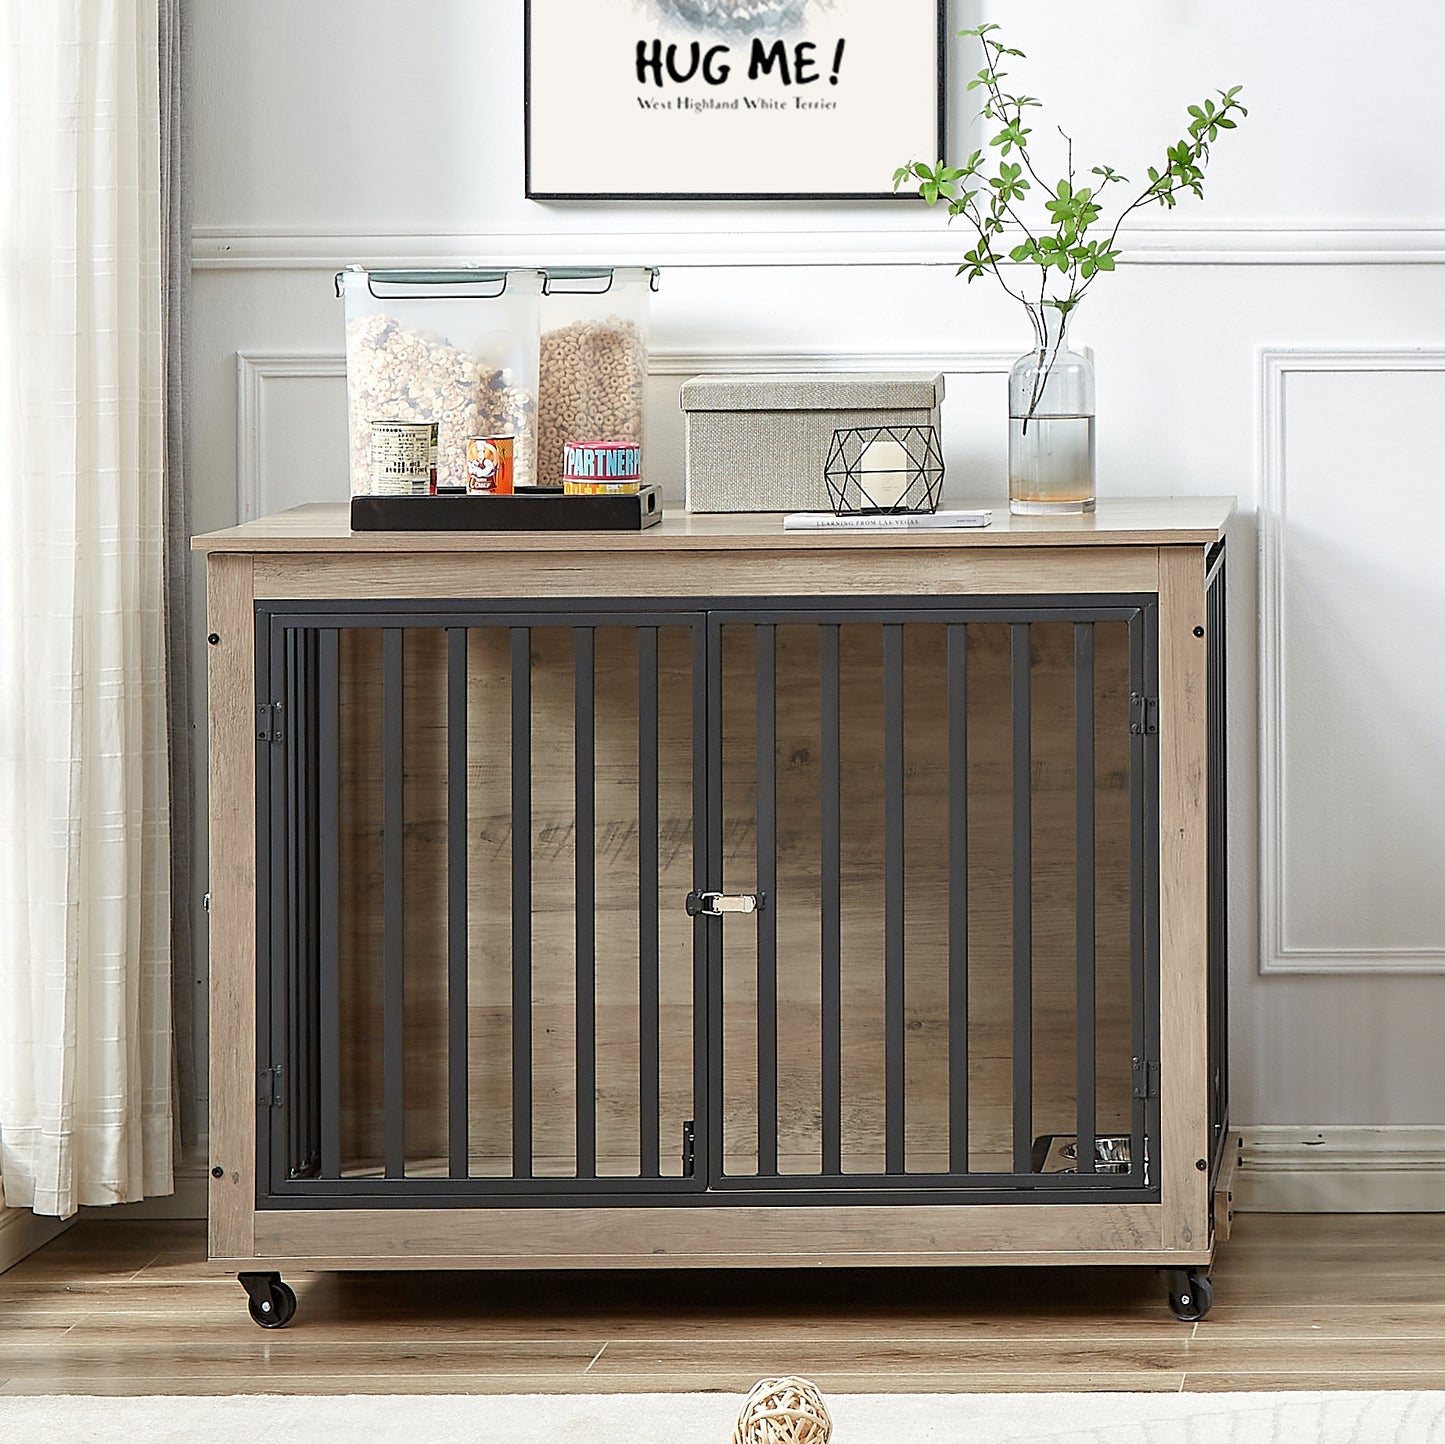 Furniture Style Dog Crate Side Table With Feeding Bowl, Wheels, Three Doors, Flip-Up Top Opening. Indoor, Grey, 43.7"W x 30"D x 33.7"H